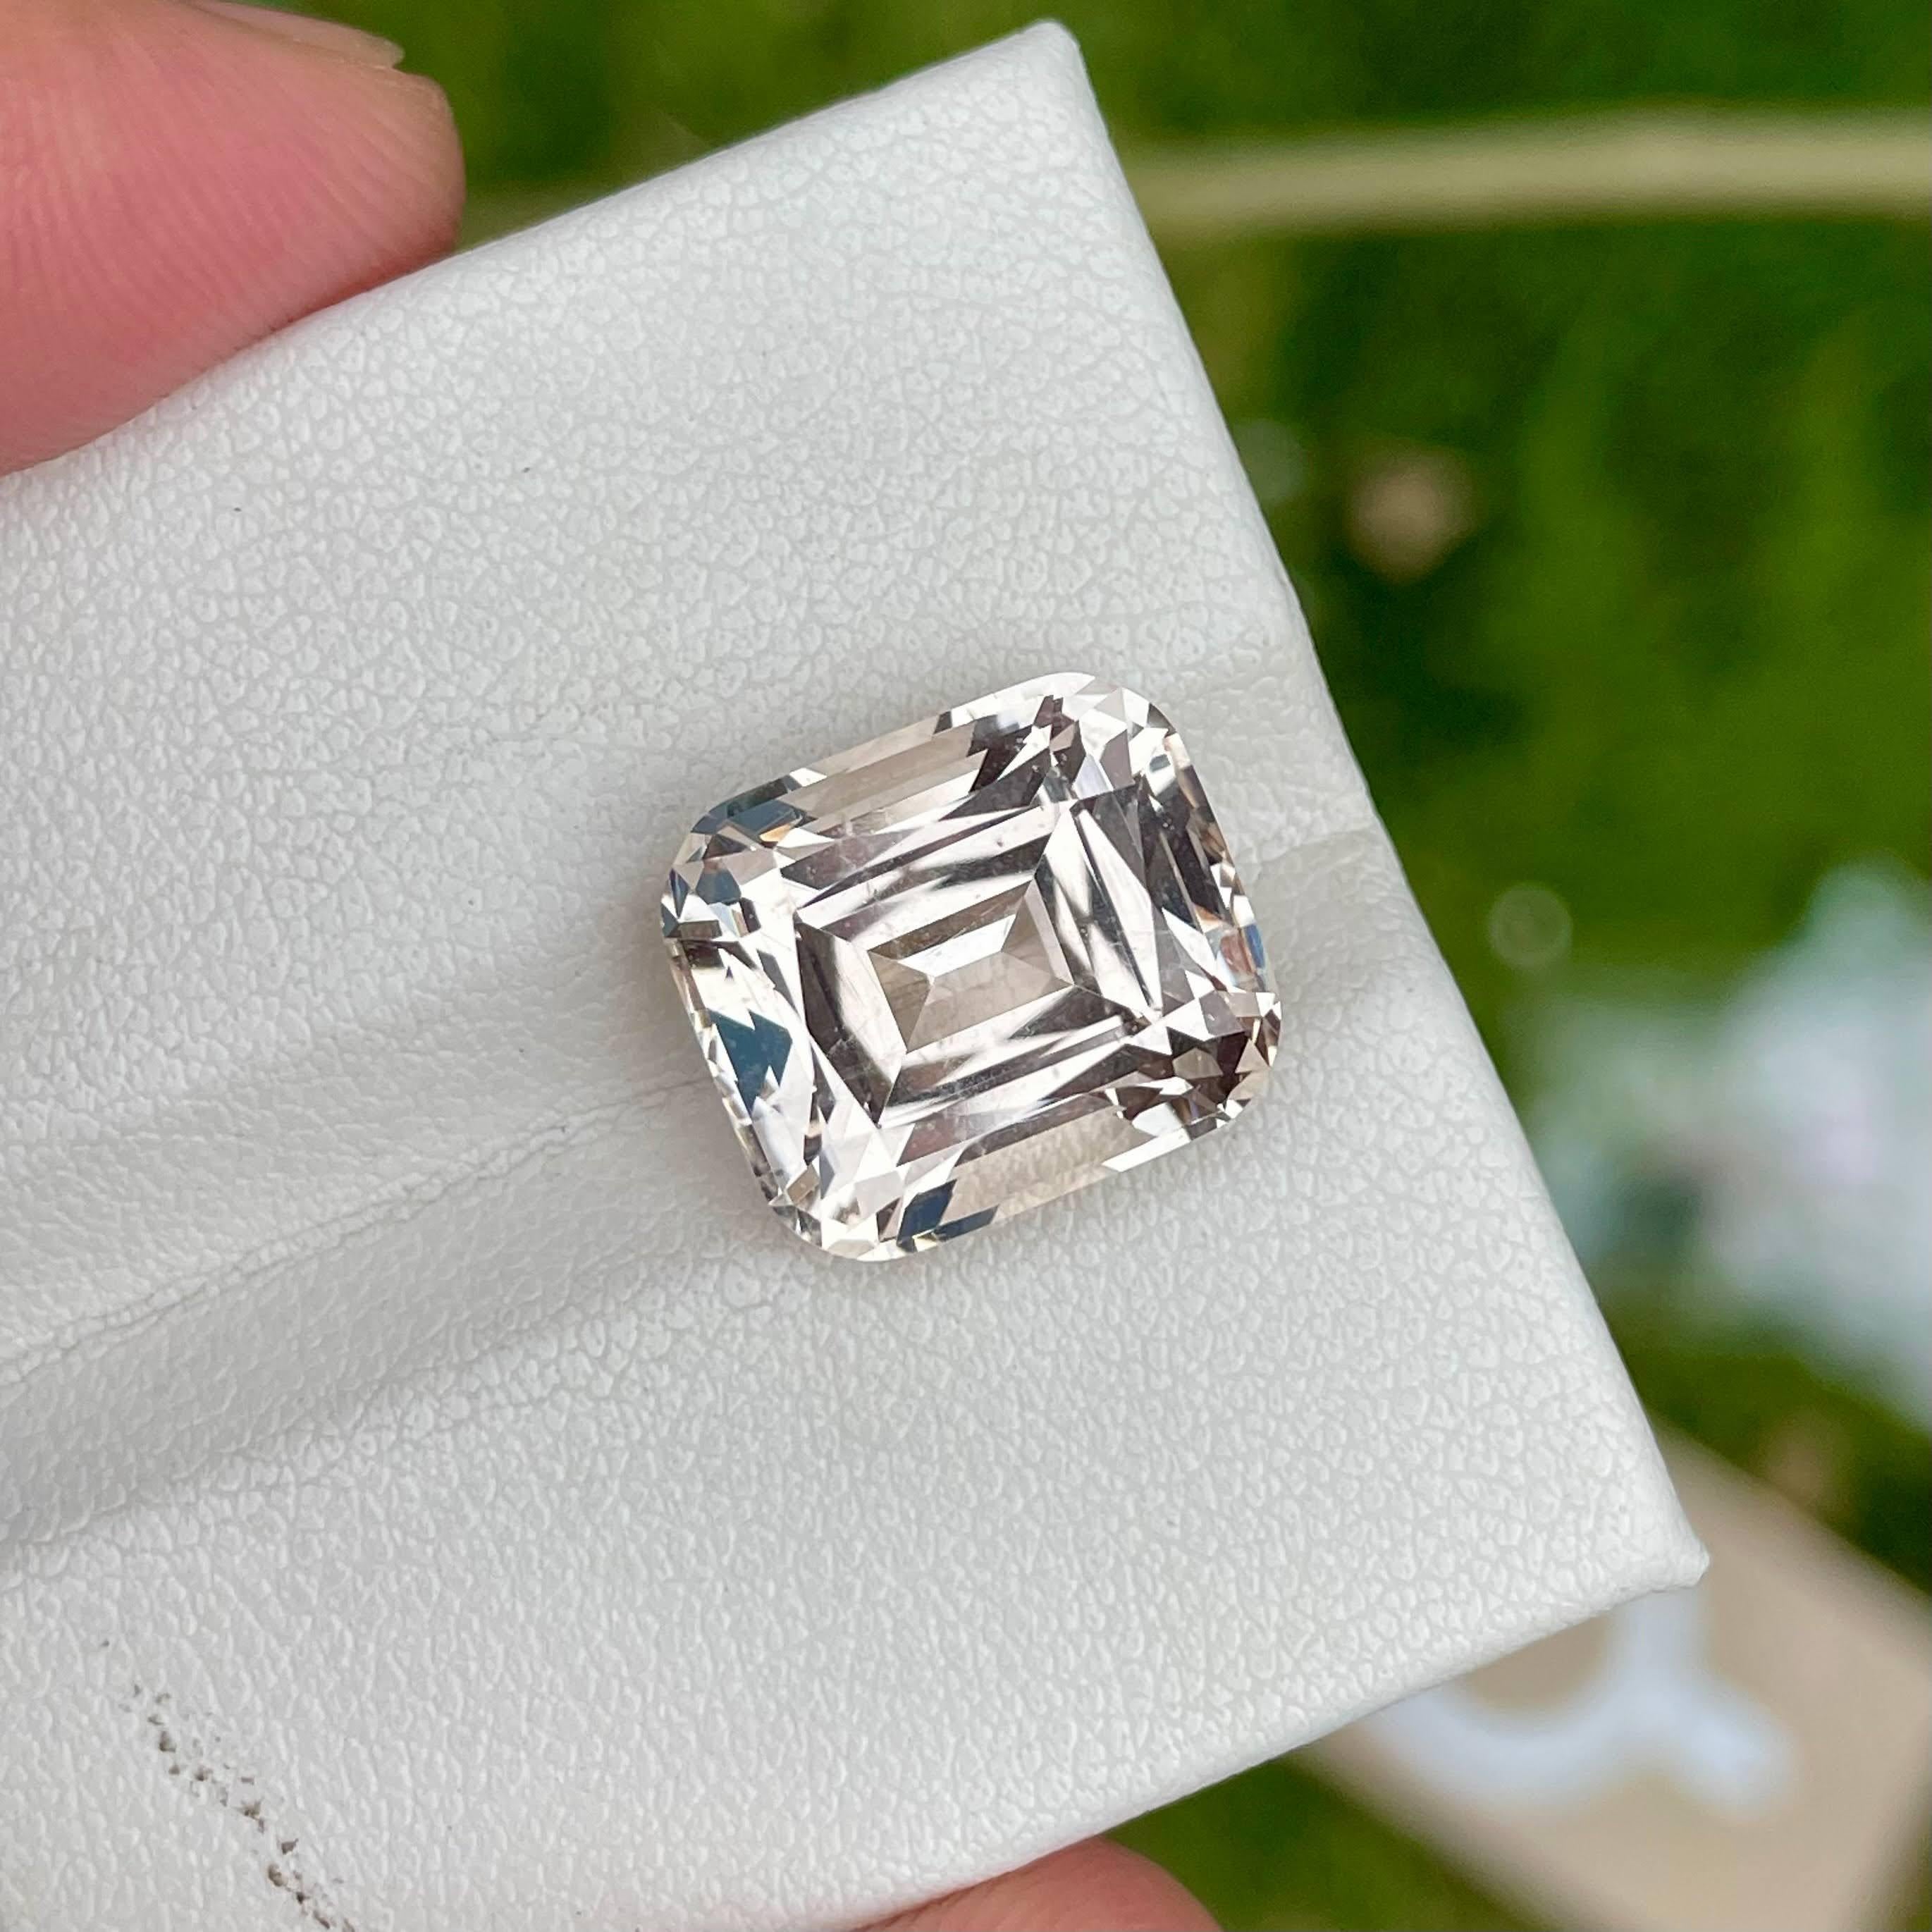 Weight 12.35 carats 
Dimensions 13.4x11.6x9.1 mm
Treatment none 
Origin Pakistan 
Clarity VVS 
Shape cushion 
Cut fancy cushion 



Crafted with precision and showcasing unmatched elegance, the 12.35 carats Quality Topaz Stone in a cushion cut